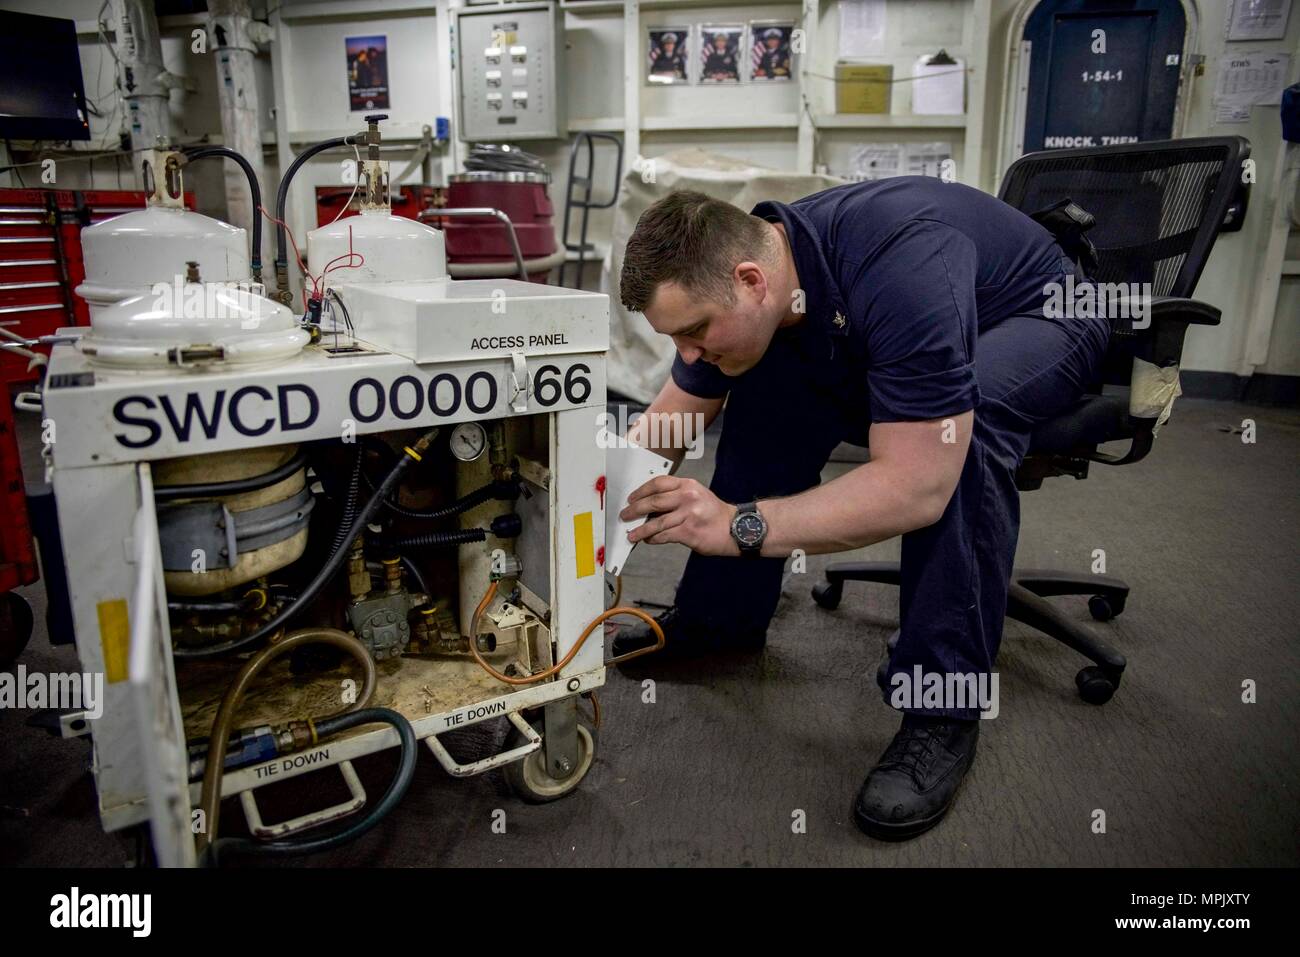 170317-N-IE397-003    ATLANTIC OCEAN (March 17, 2017) Aviation Support Equipment Technician 3rd Class Adam Curry, from Half Moon, N.Y., conducts maintenance on a liquid cooling filtration unit in the aviation support equipment shop of the aircraft carrier USS Dwight D. Eisenhower (CVN 69) (Ike). Ike is currently conducting aircraft carrier qualifications during the sustainment phase of the Optimized Fleet Response Plan (OFRP). (U.S. Navy photo by Mass Communication Specialist 3rd Class Christopher A. Michaels) Stock Photo